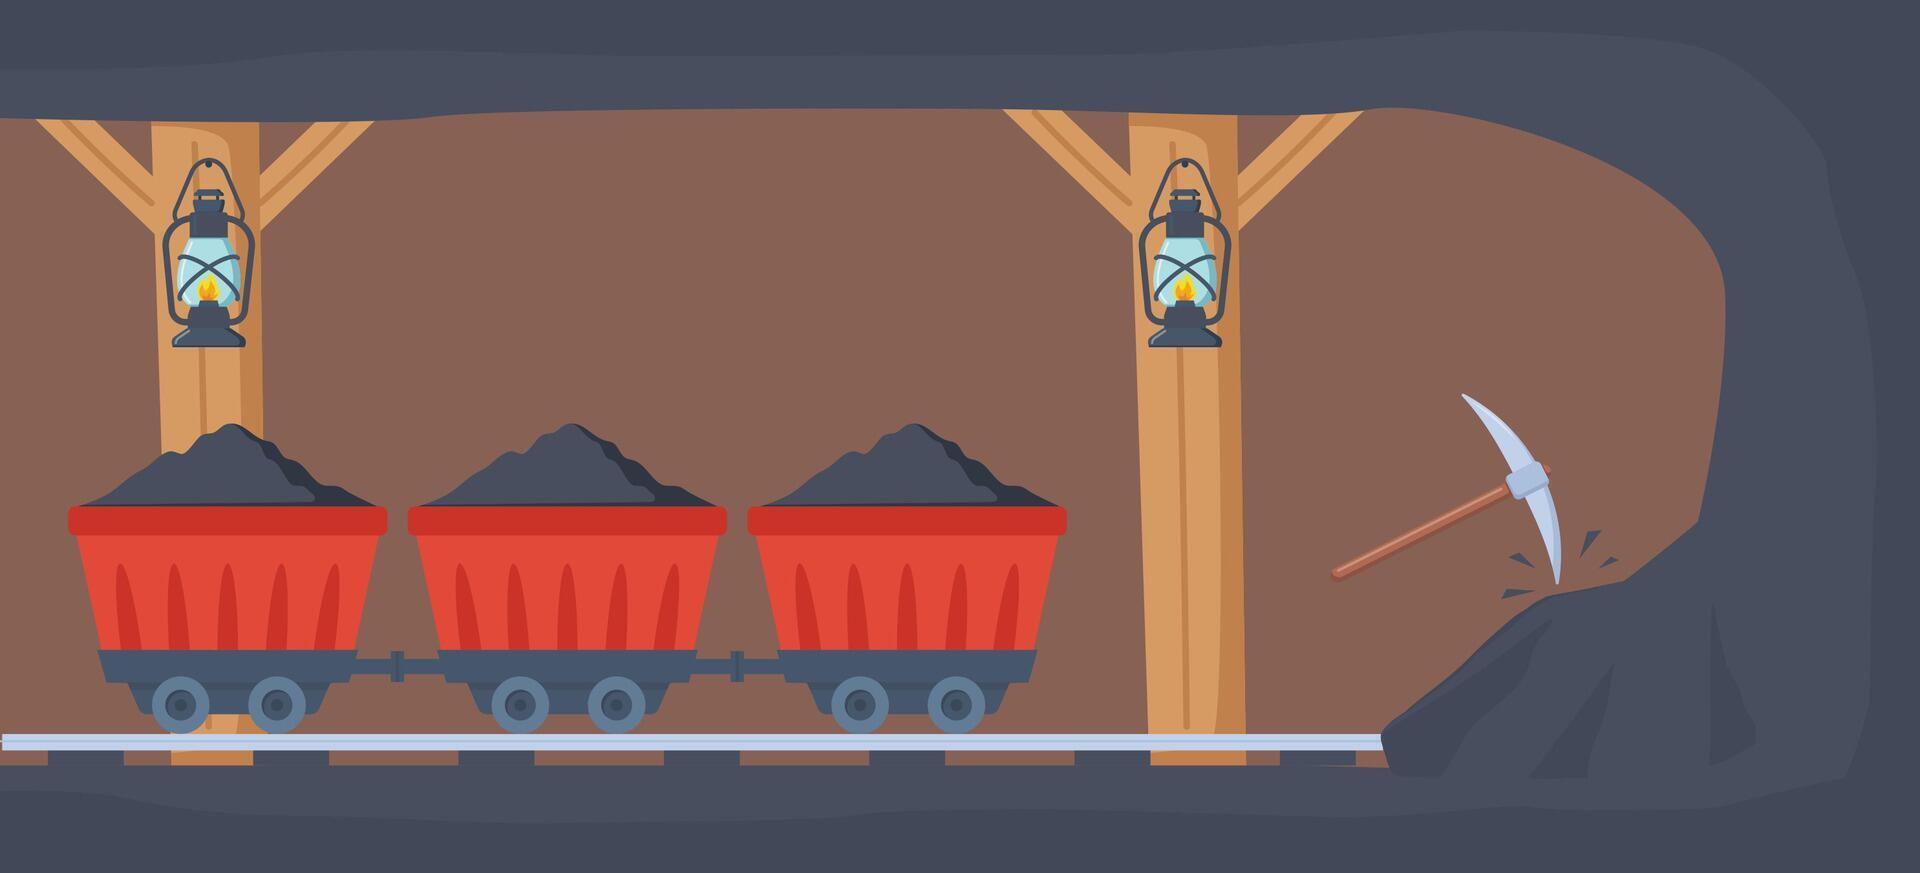 Coal mine tunnel. Trolley with coal in old mining cave interior. Hard work, extracting stone, metal construction for transportation. Vector illustration.